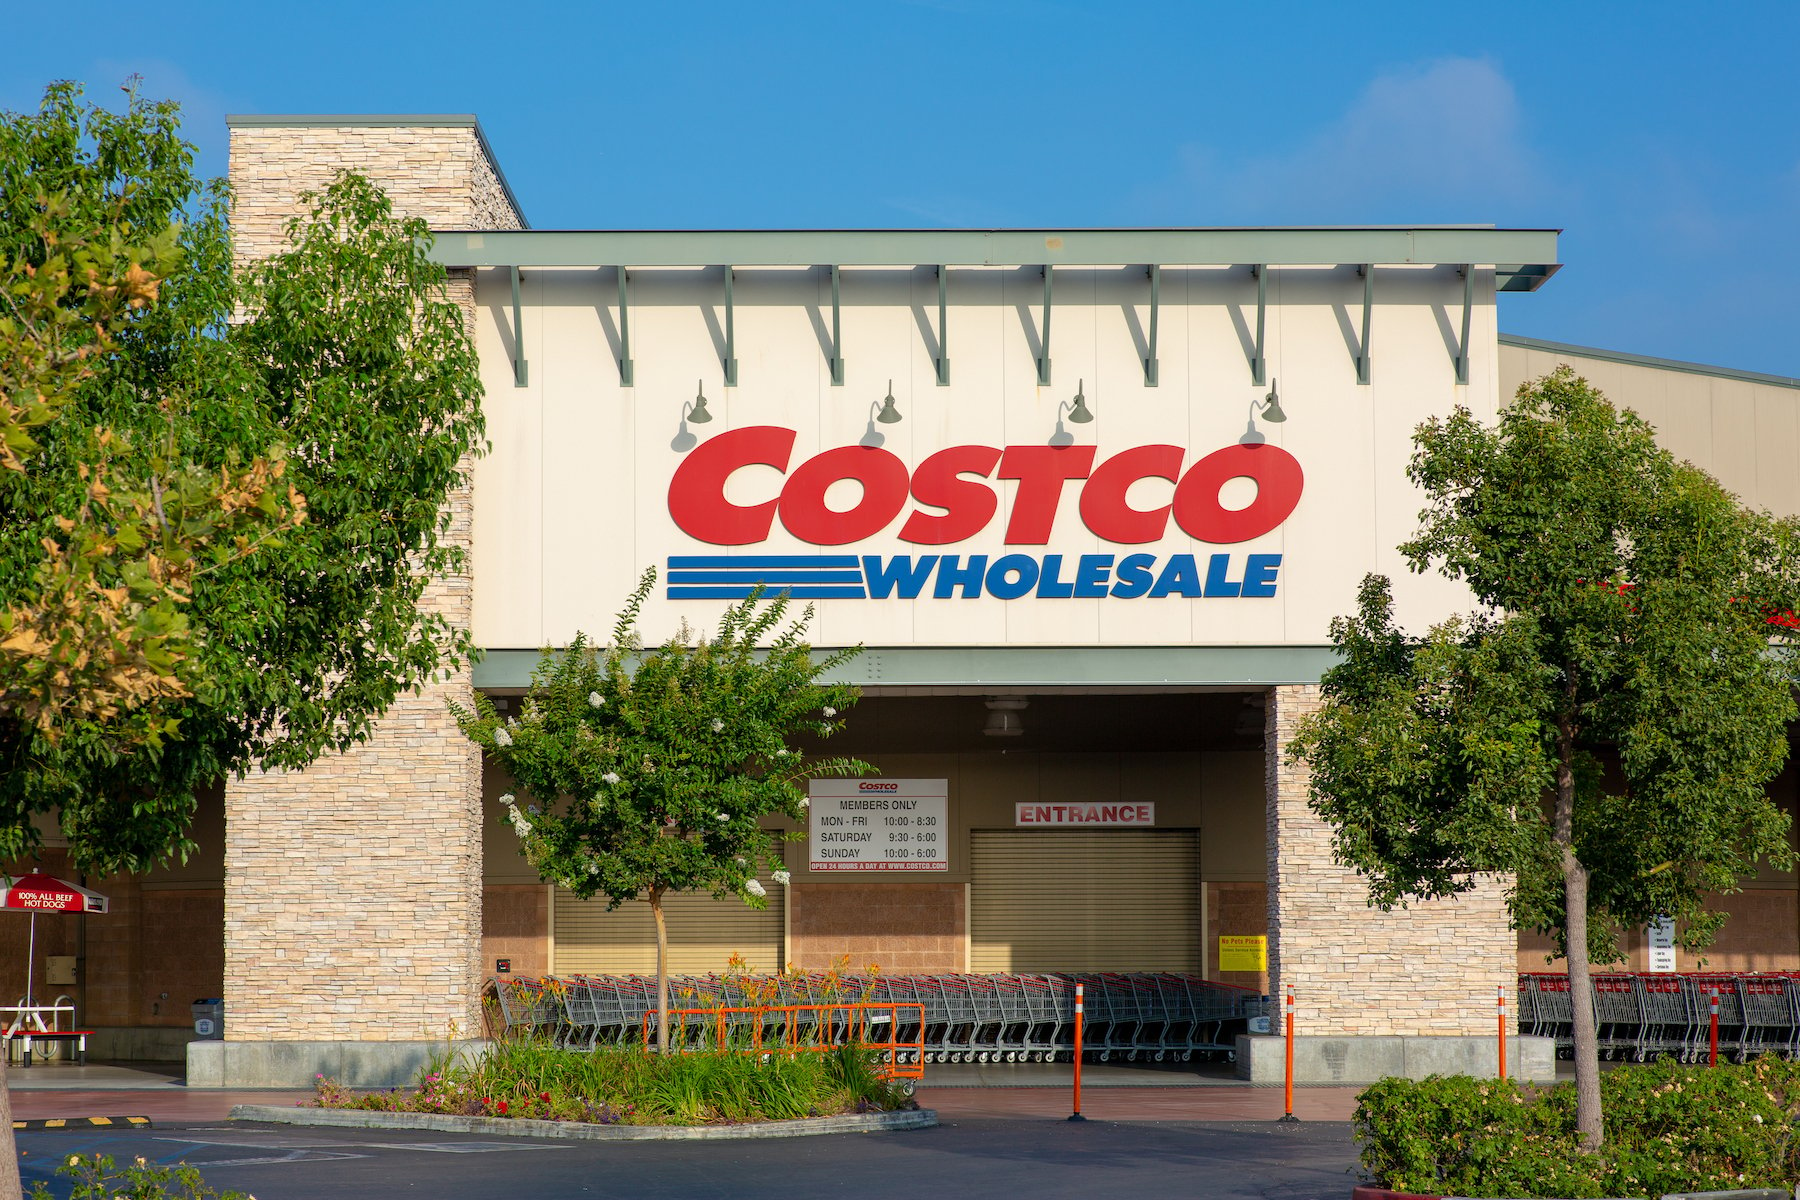 10 Costco products that can support metabolic health